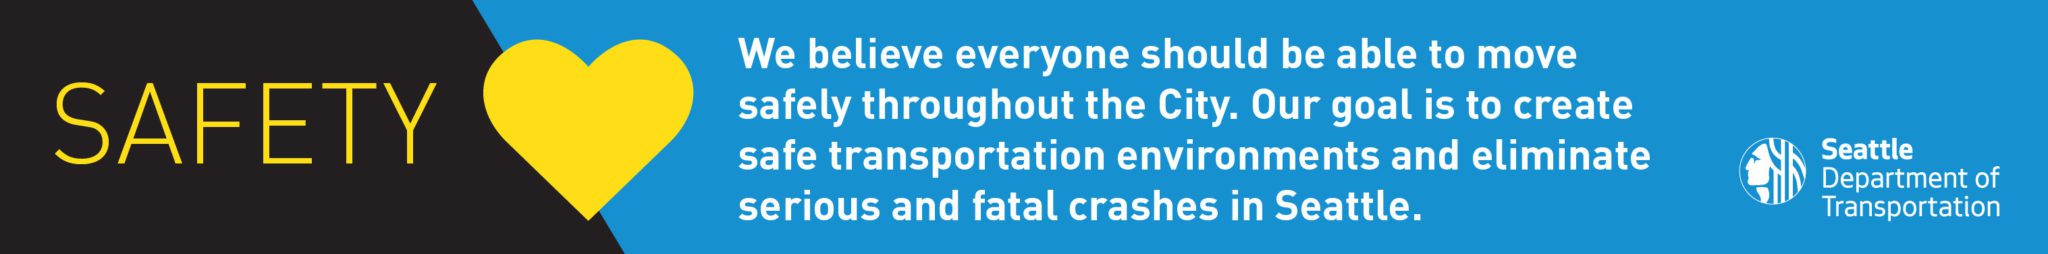 Graphic icon depicting Safety as a core value and goal of SDOT. The graphic has a yellow heart and the SDOT logo, and says "We believe everyone should be able to move safely throughout the City. Our goal is to create safe transportation environments and eliminate serious and fatal crashes in Seattle.